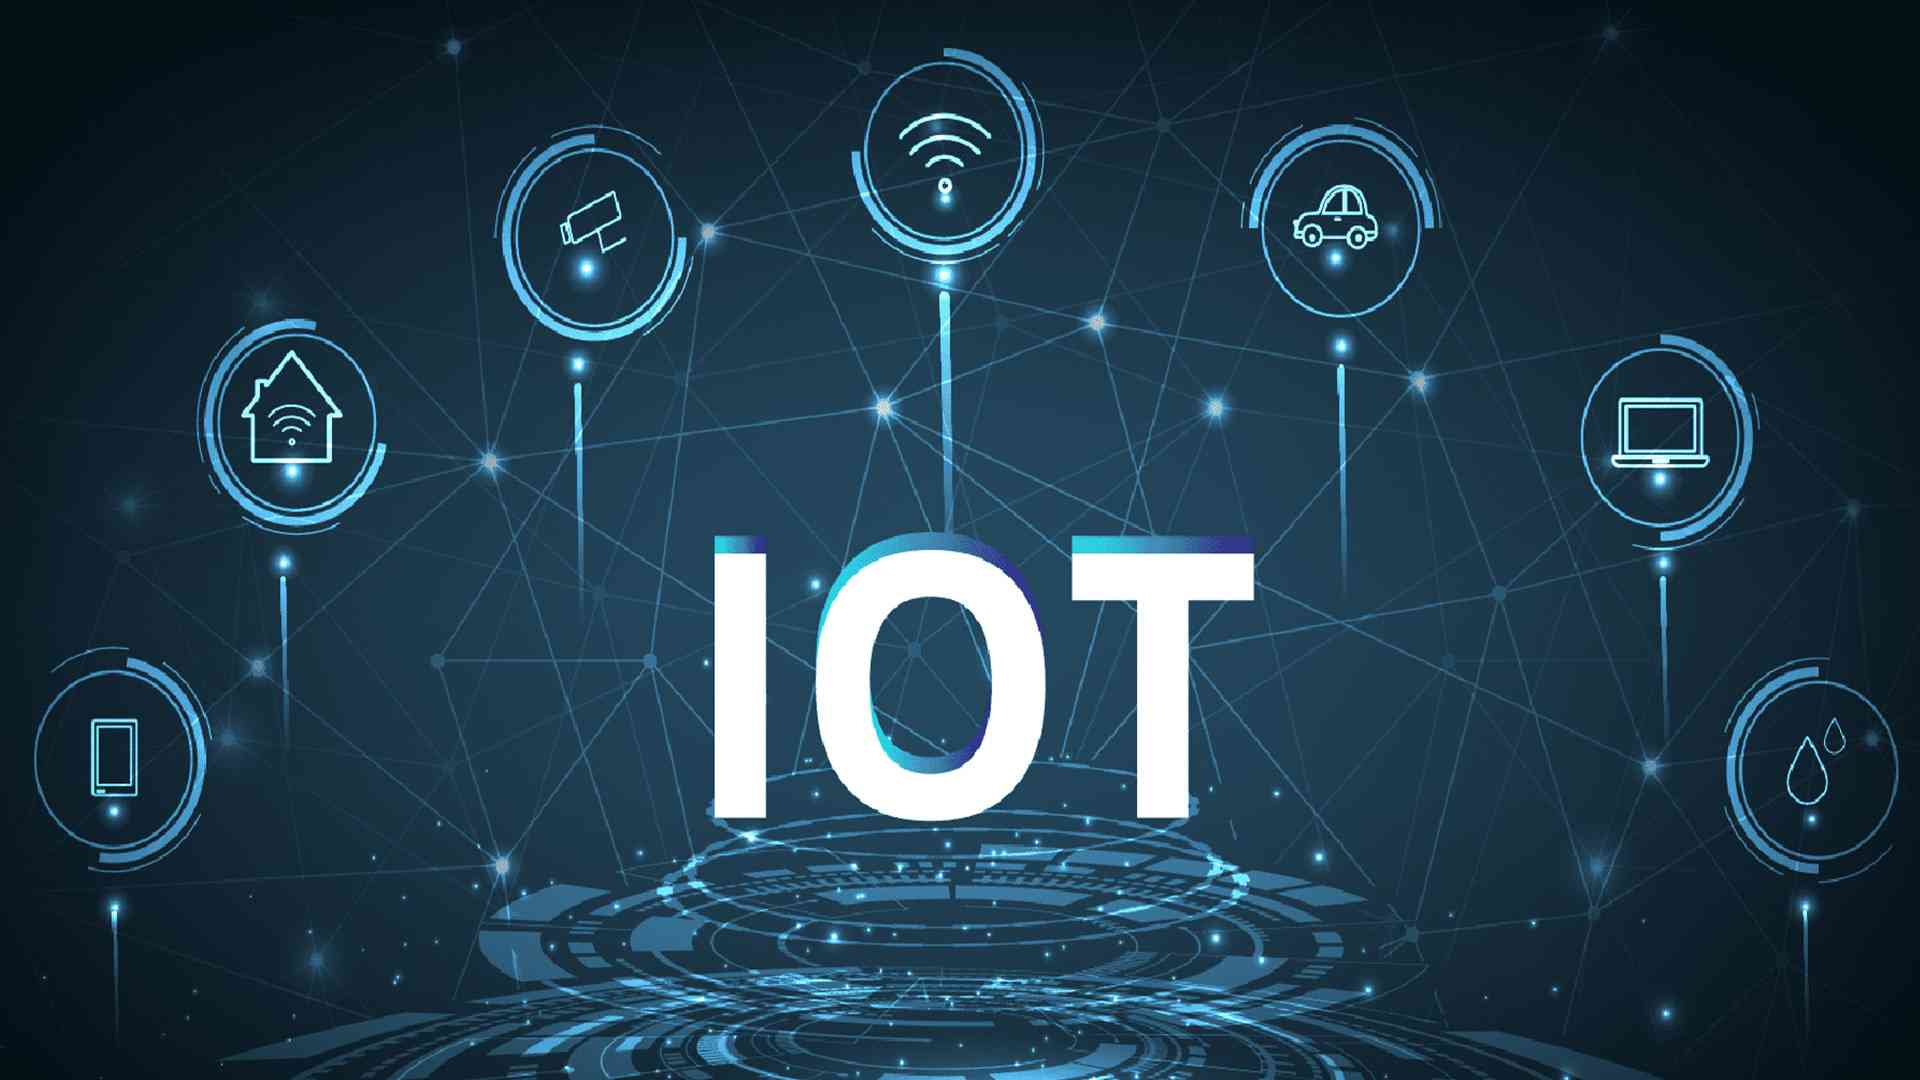 What need to be considered when developing an IoT Platform ?